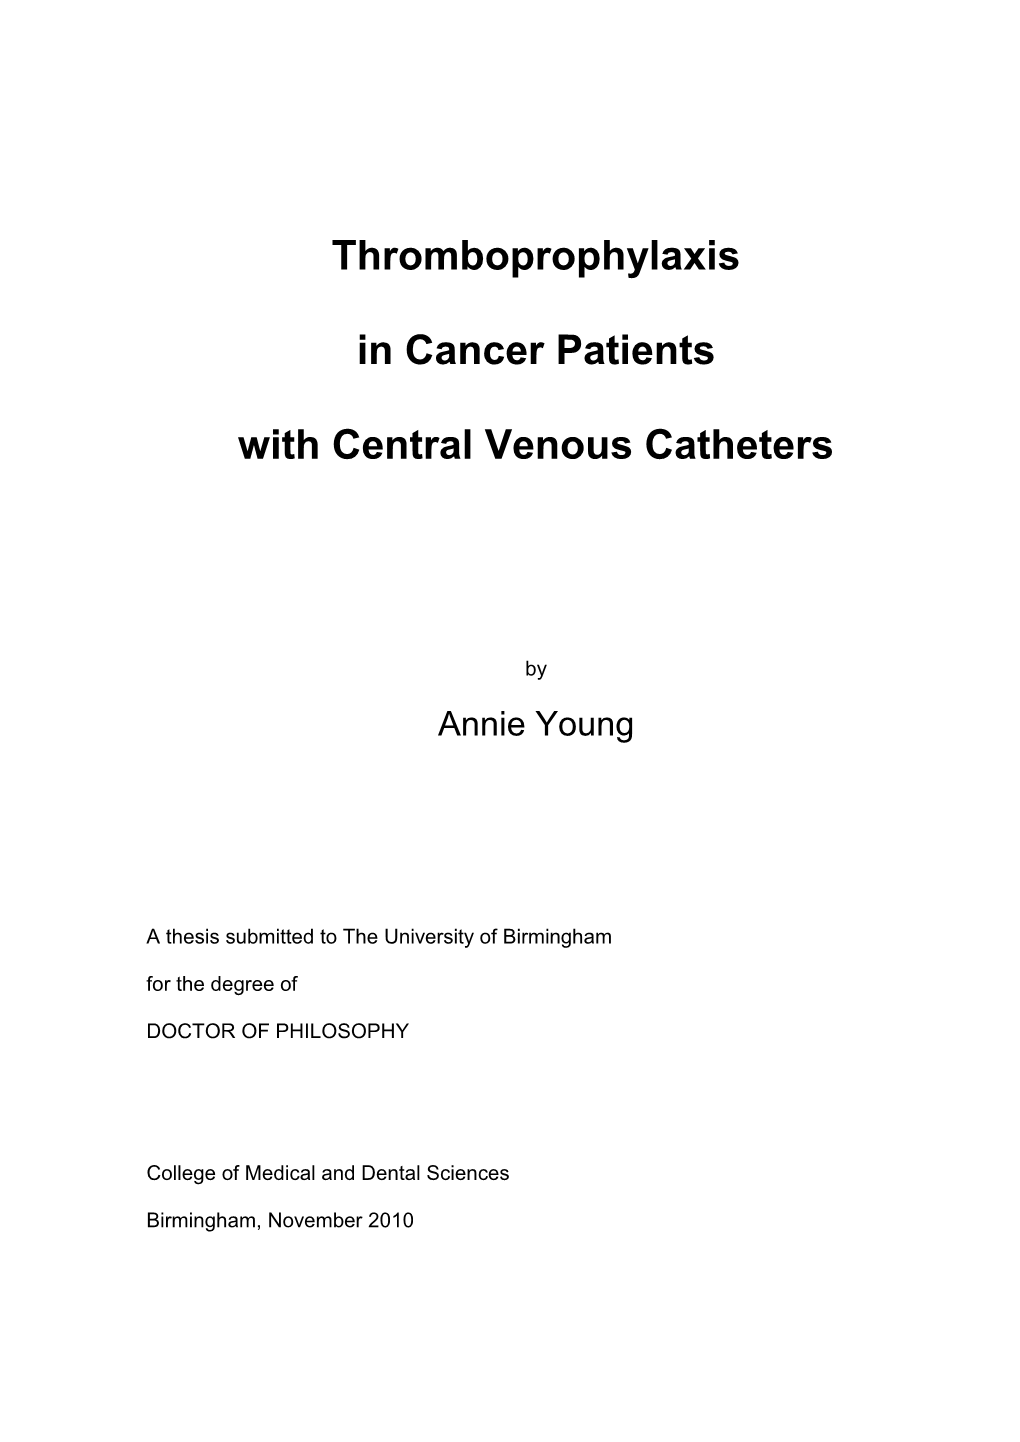 Thromboprophylaxis in Cancer Patients with Central Venous Catheters